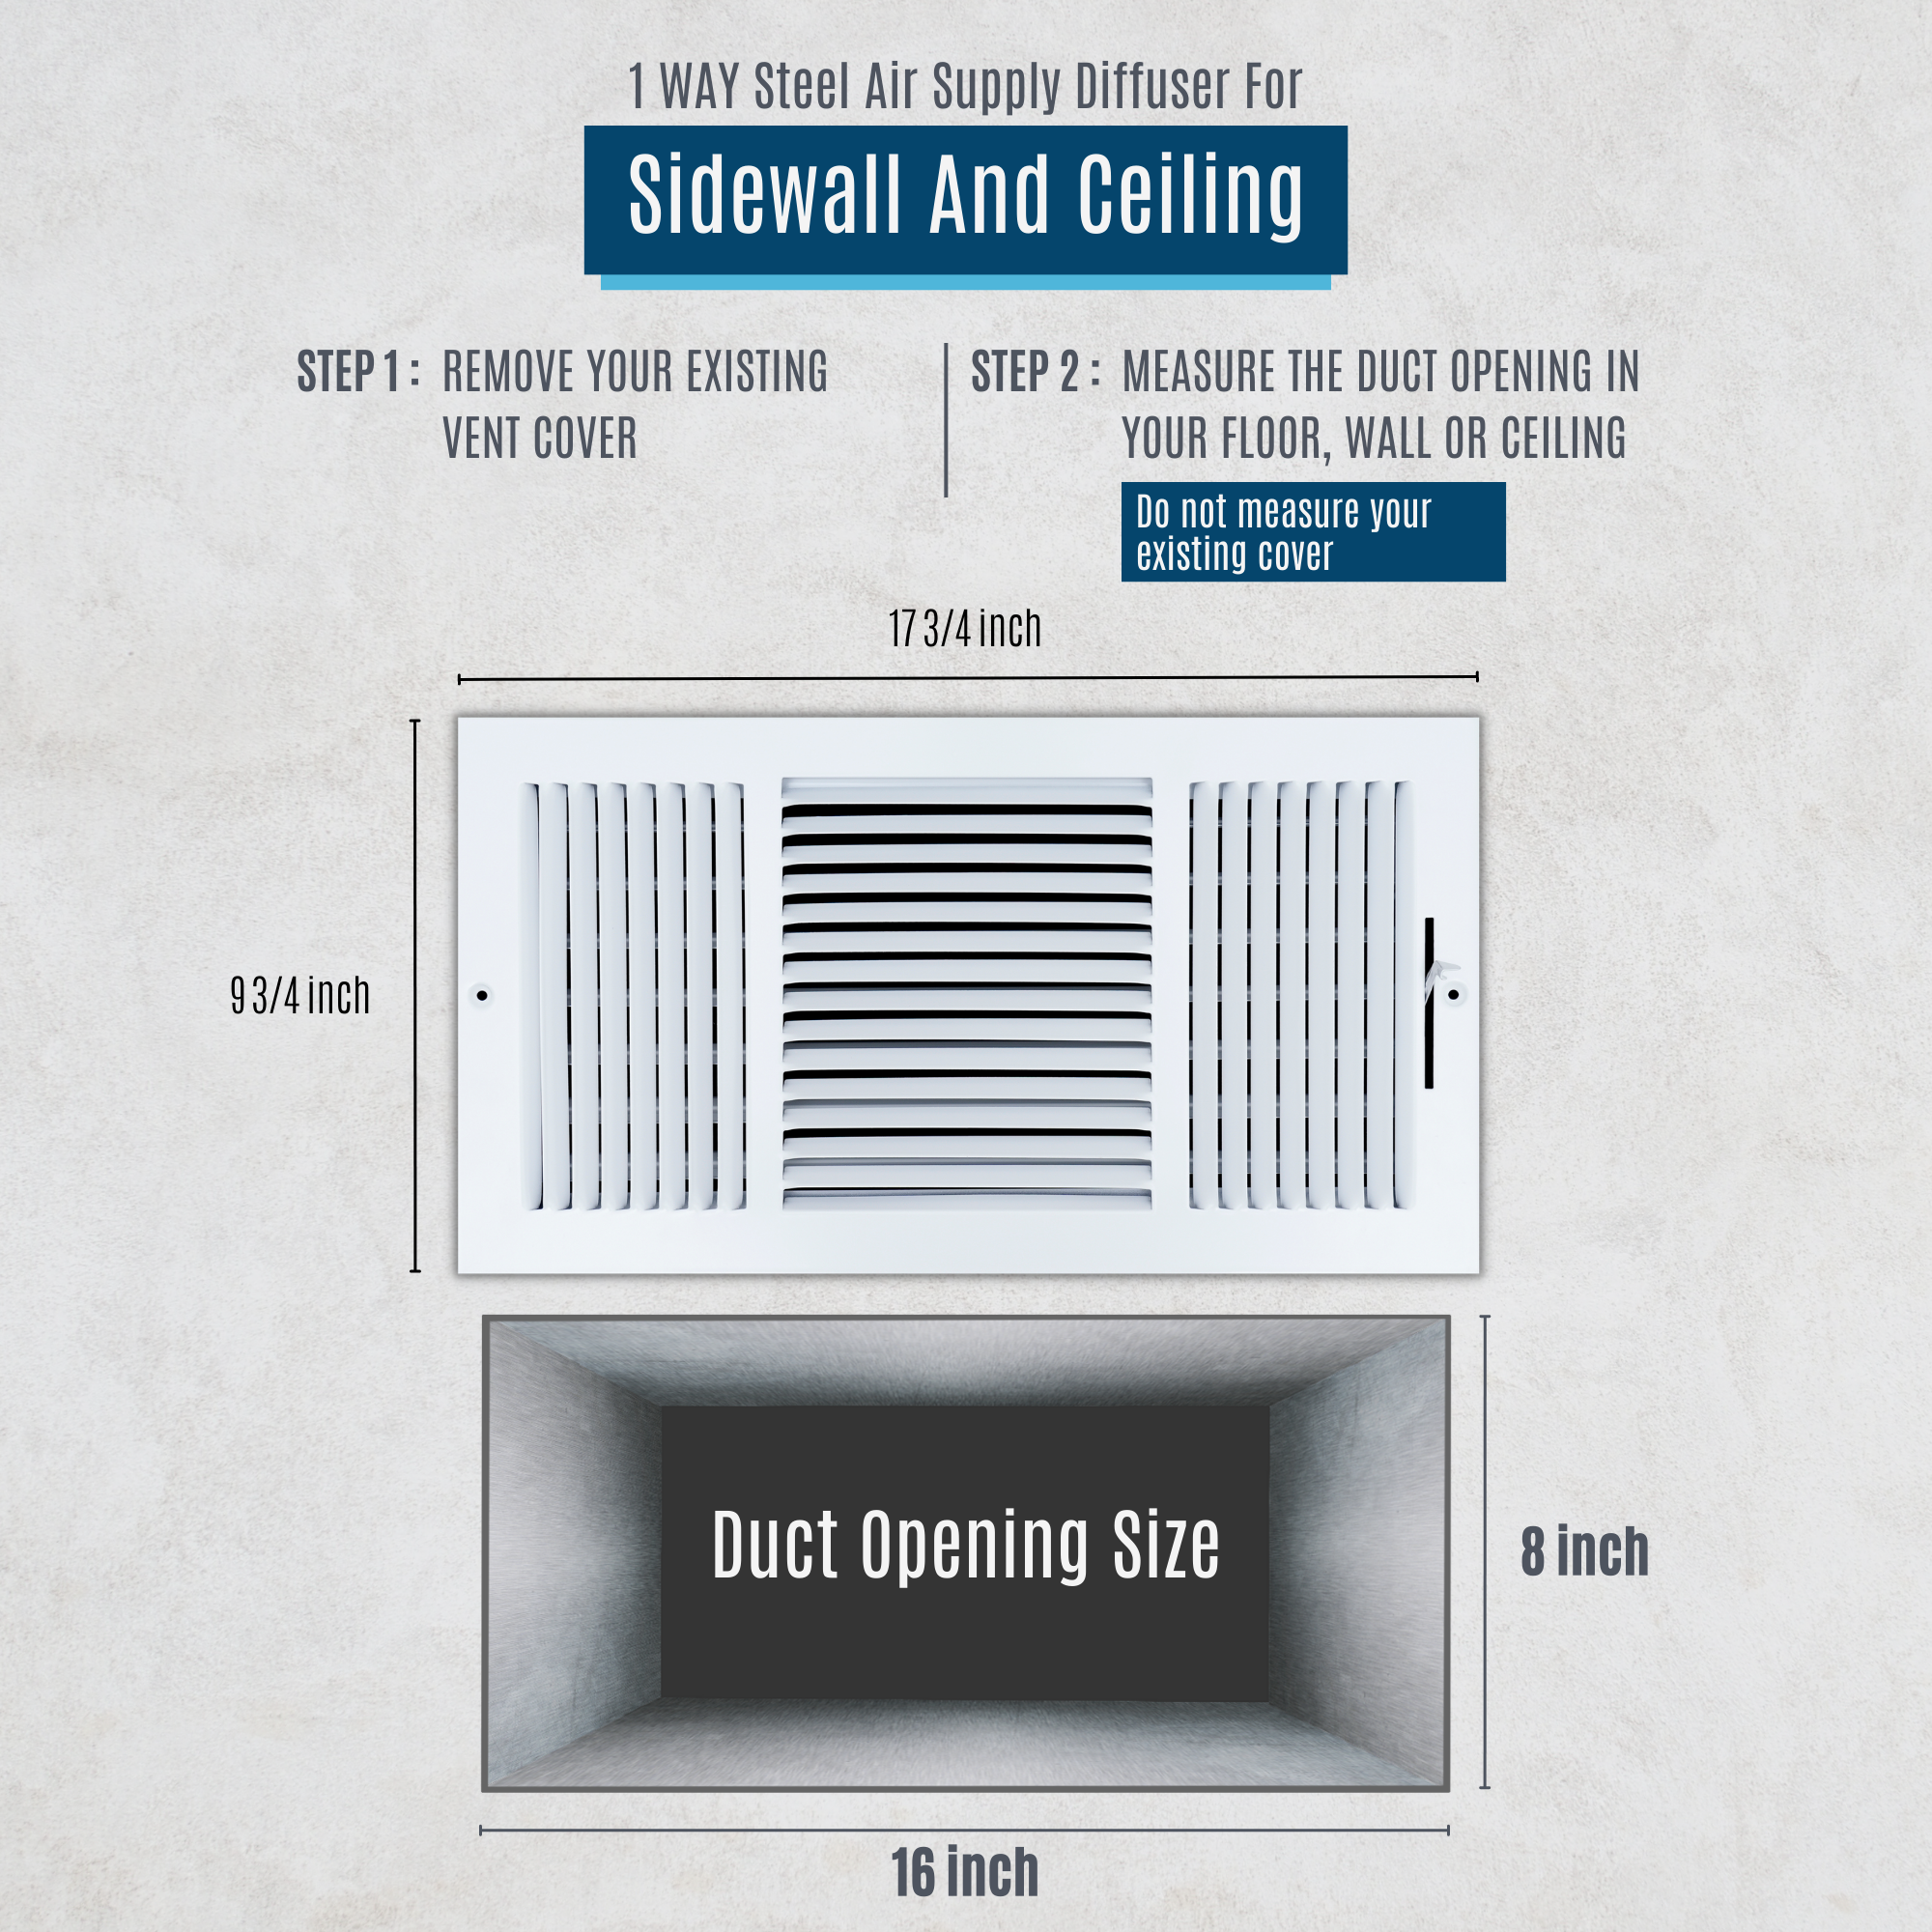 16 X 8 Duct Opening | 3 WAY Steel Air Supply Diffuser for Sidewall and Ceiling